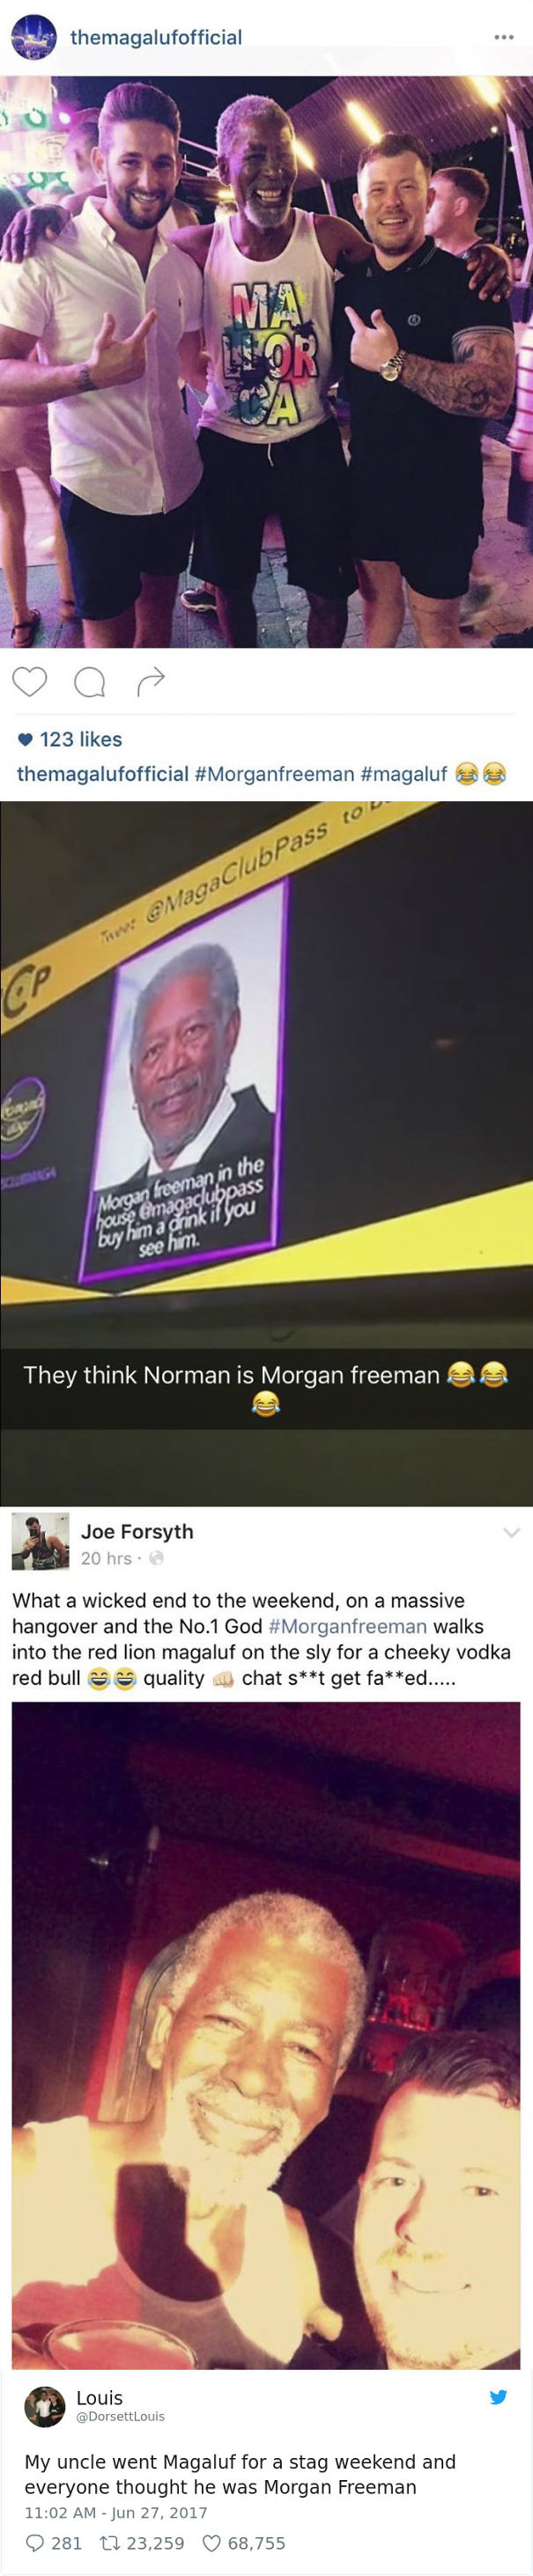 poster - themagalufofficial 123 themagalufofficial MagaClubPass tou ww op Morgan leman in the house magaclubpass see him. buy him a grink il you They think Norman is Morgan freeman a Joe Forsyth 20 hrs. What a wicked end to the weekend, on a massive hango